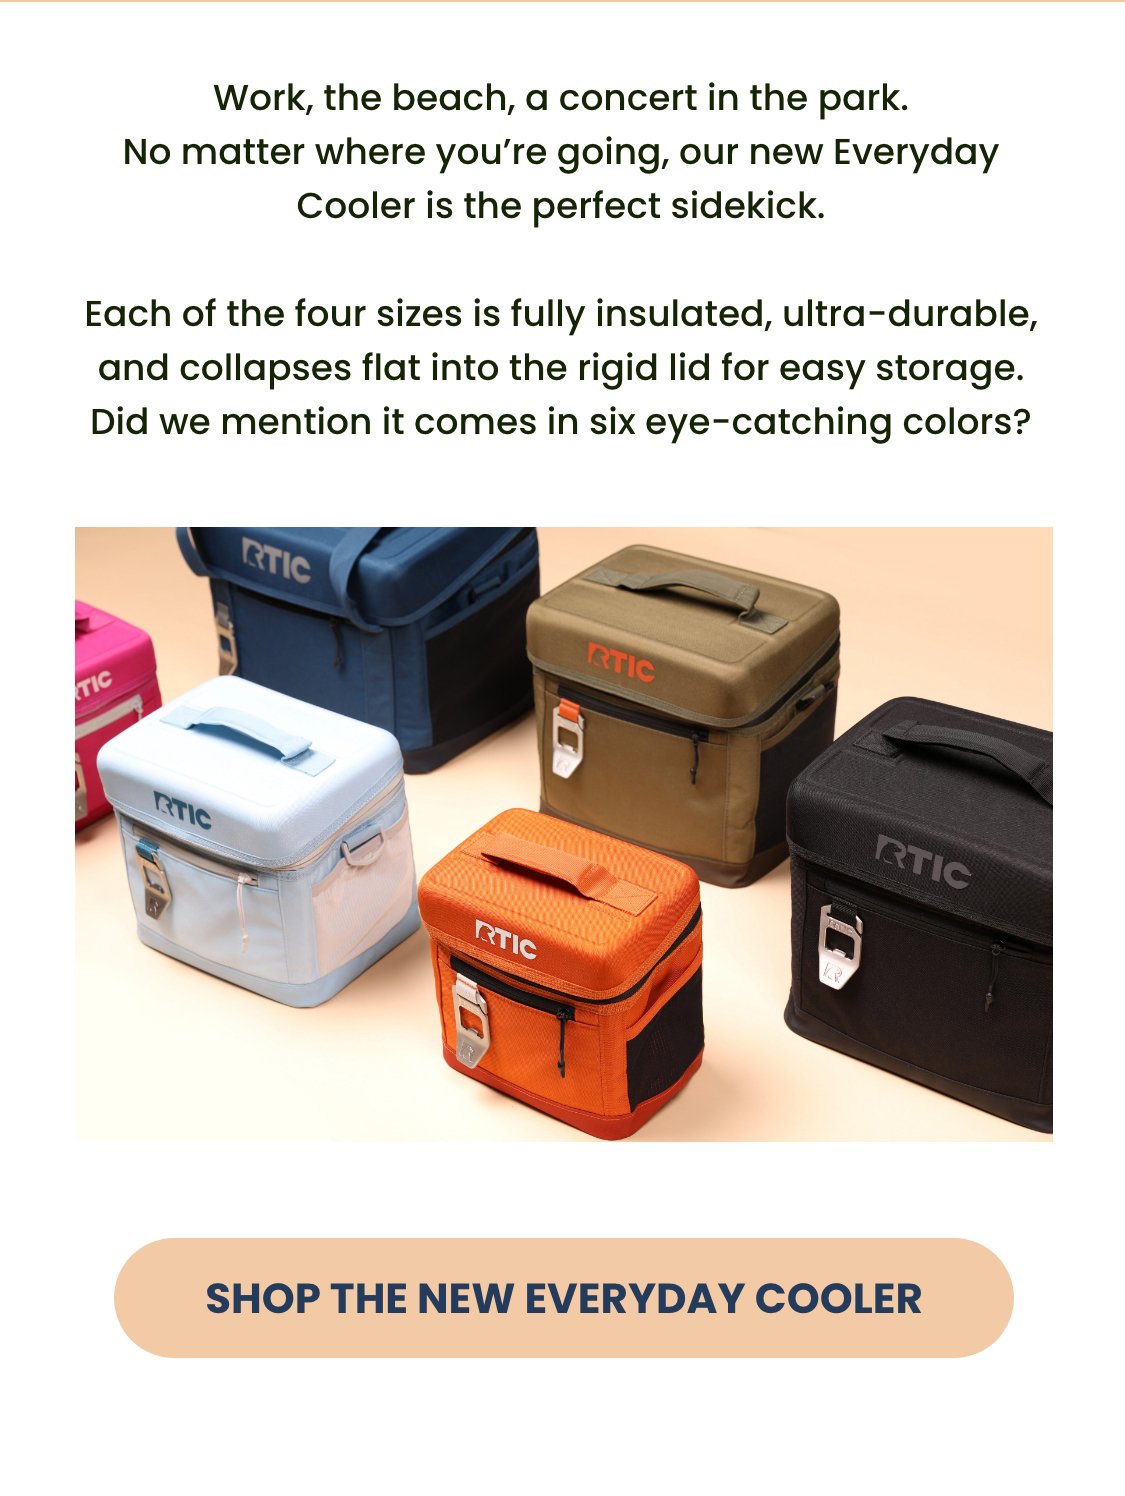 RTIC: The Everyday Cooler, Your New Go-To.